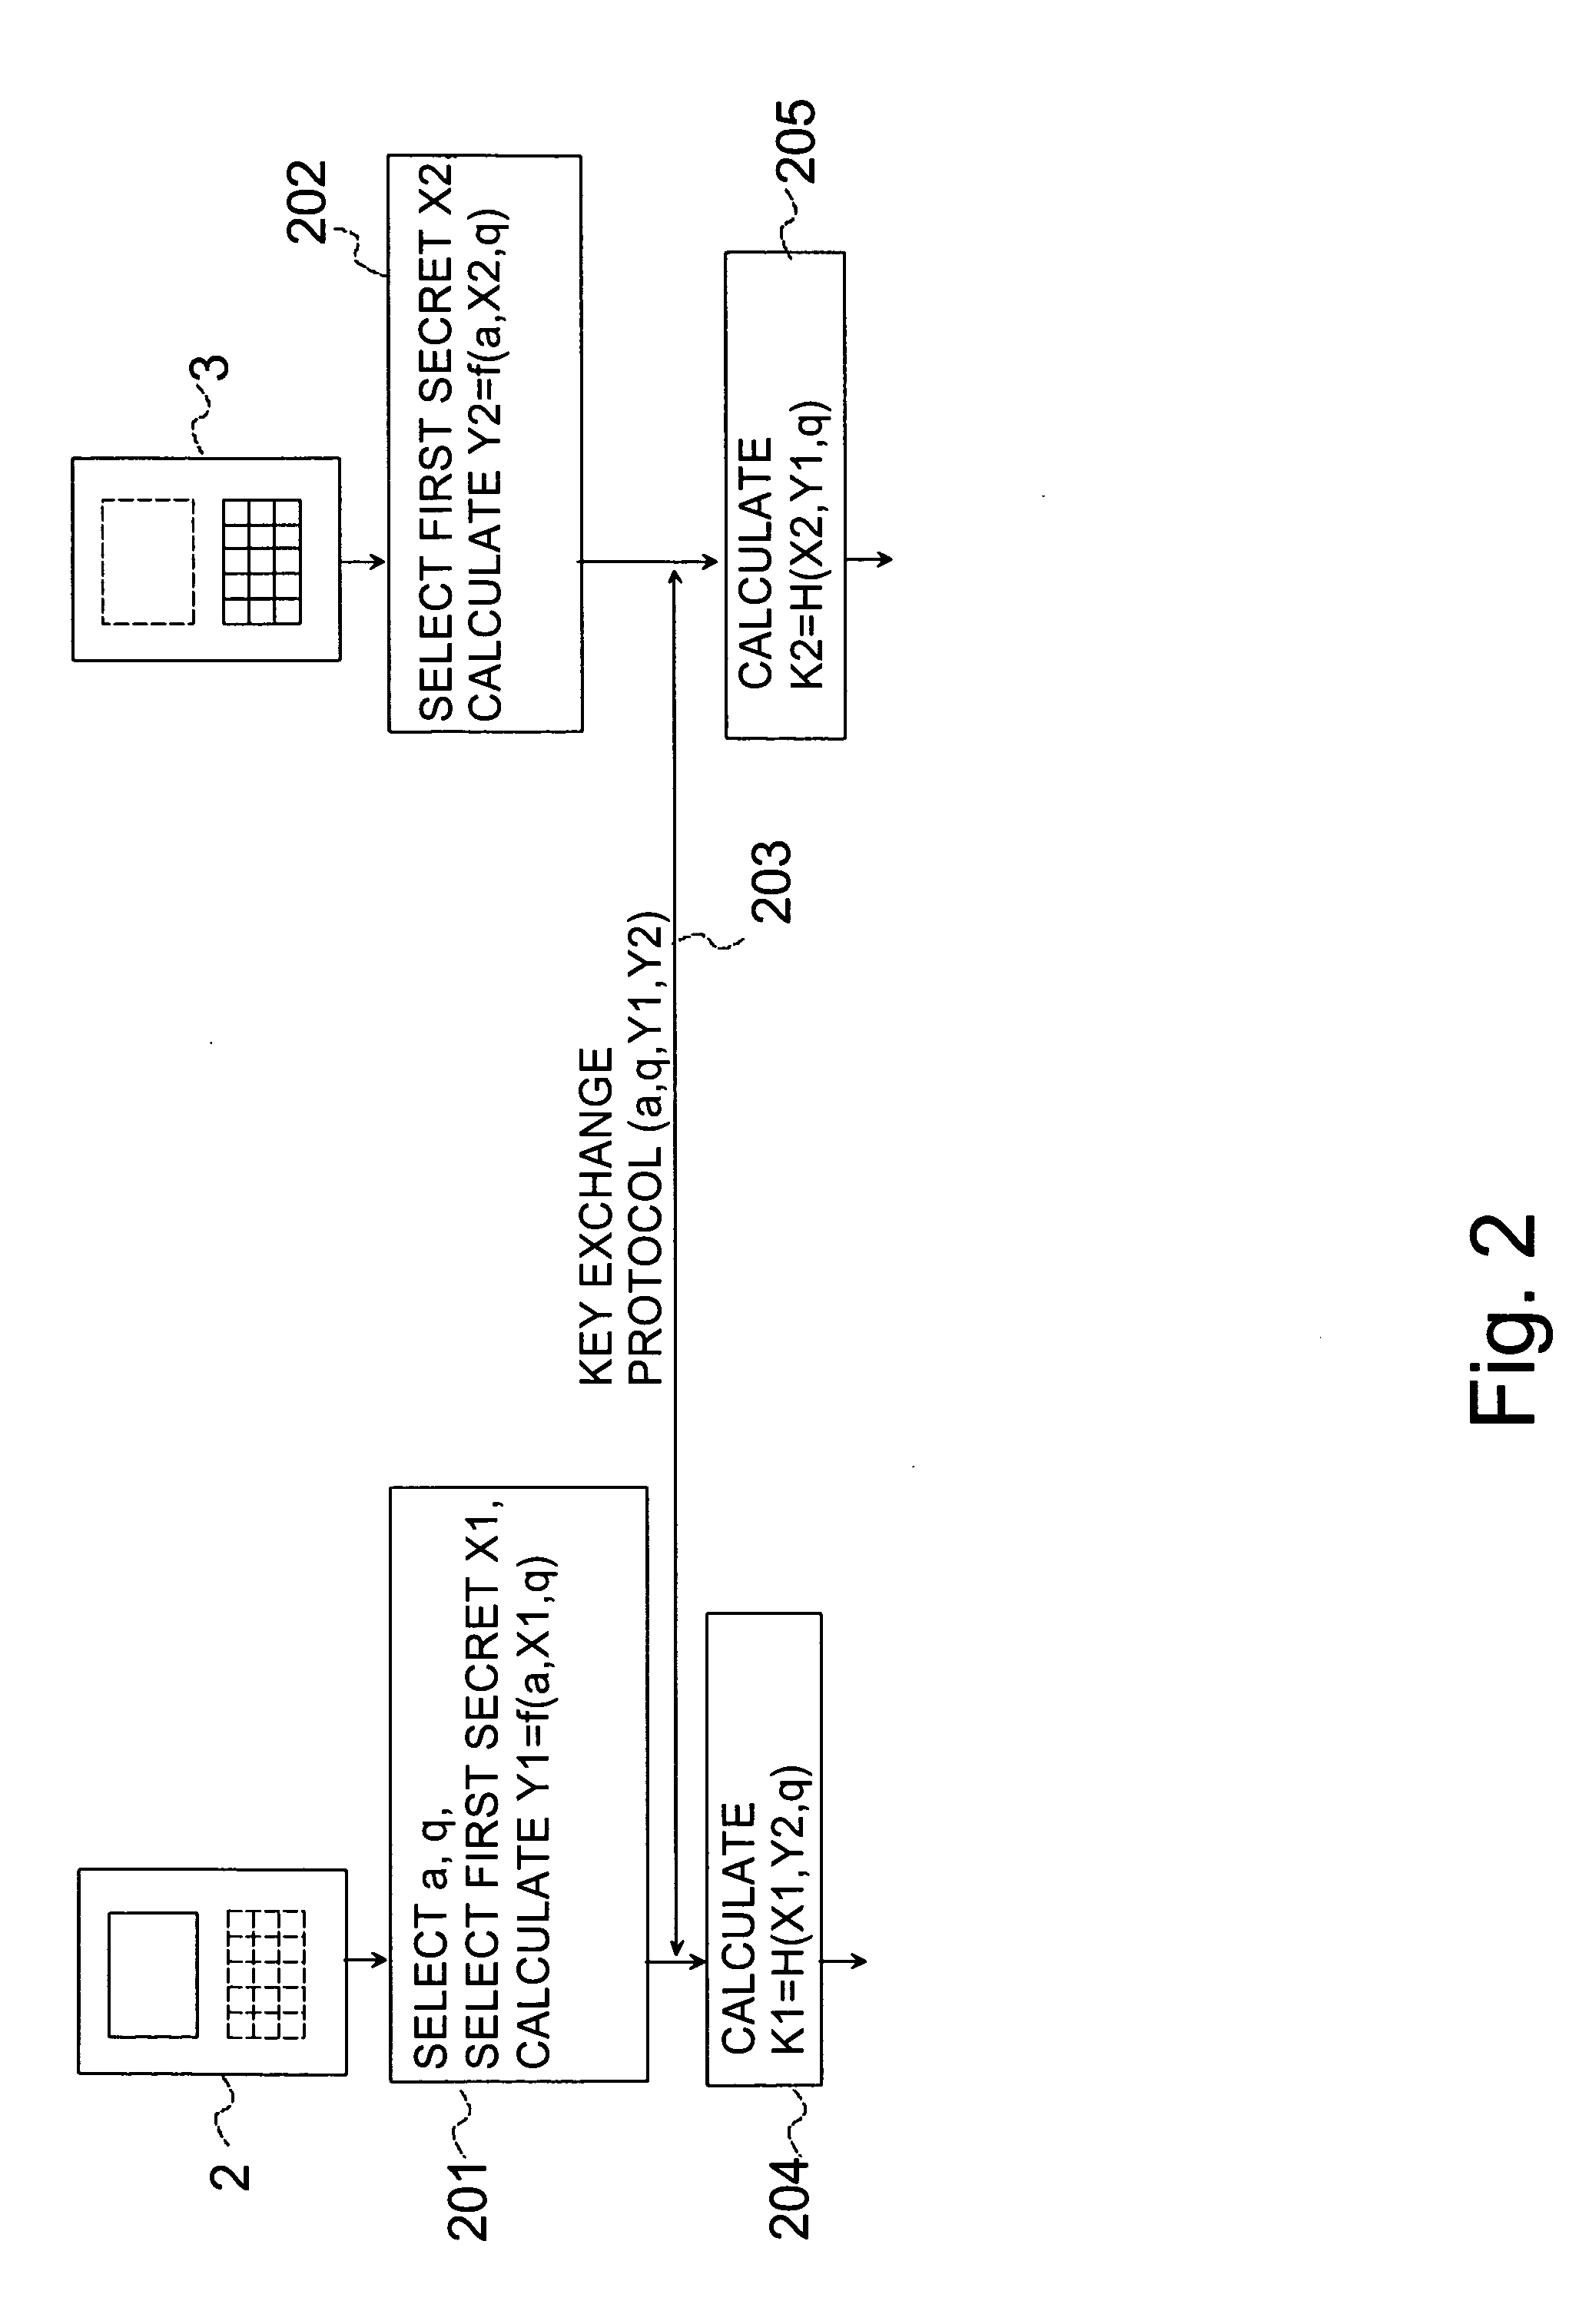 Setting up a short-range wireless data transmission connection between devices